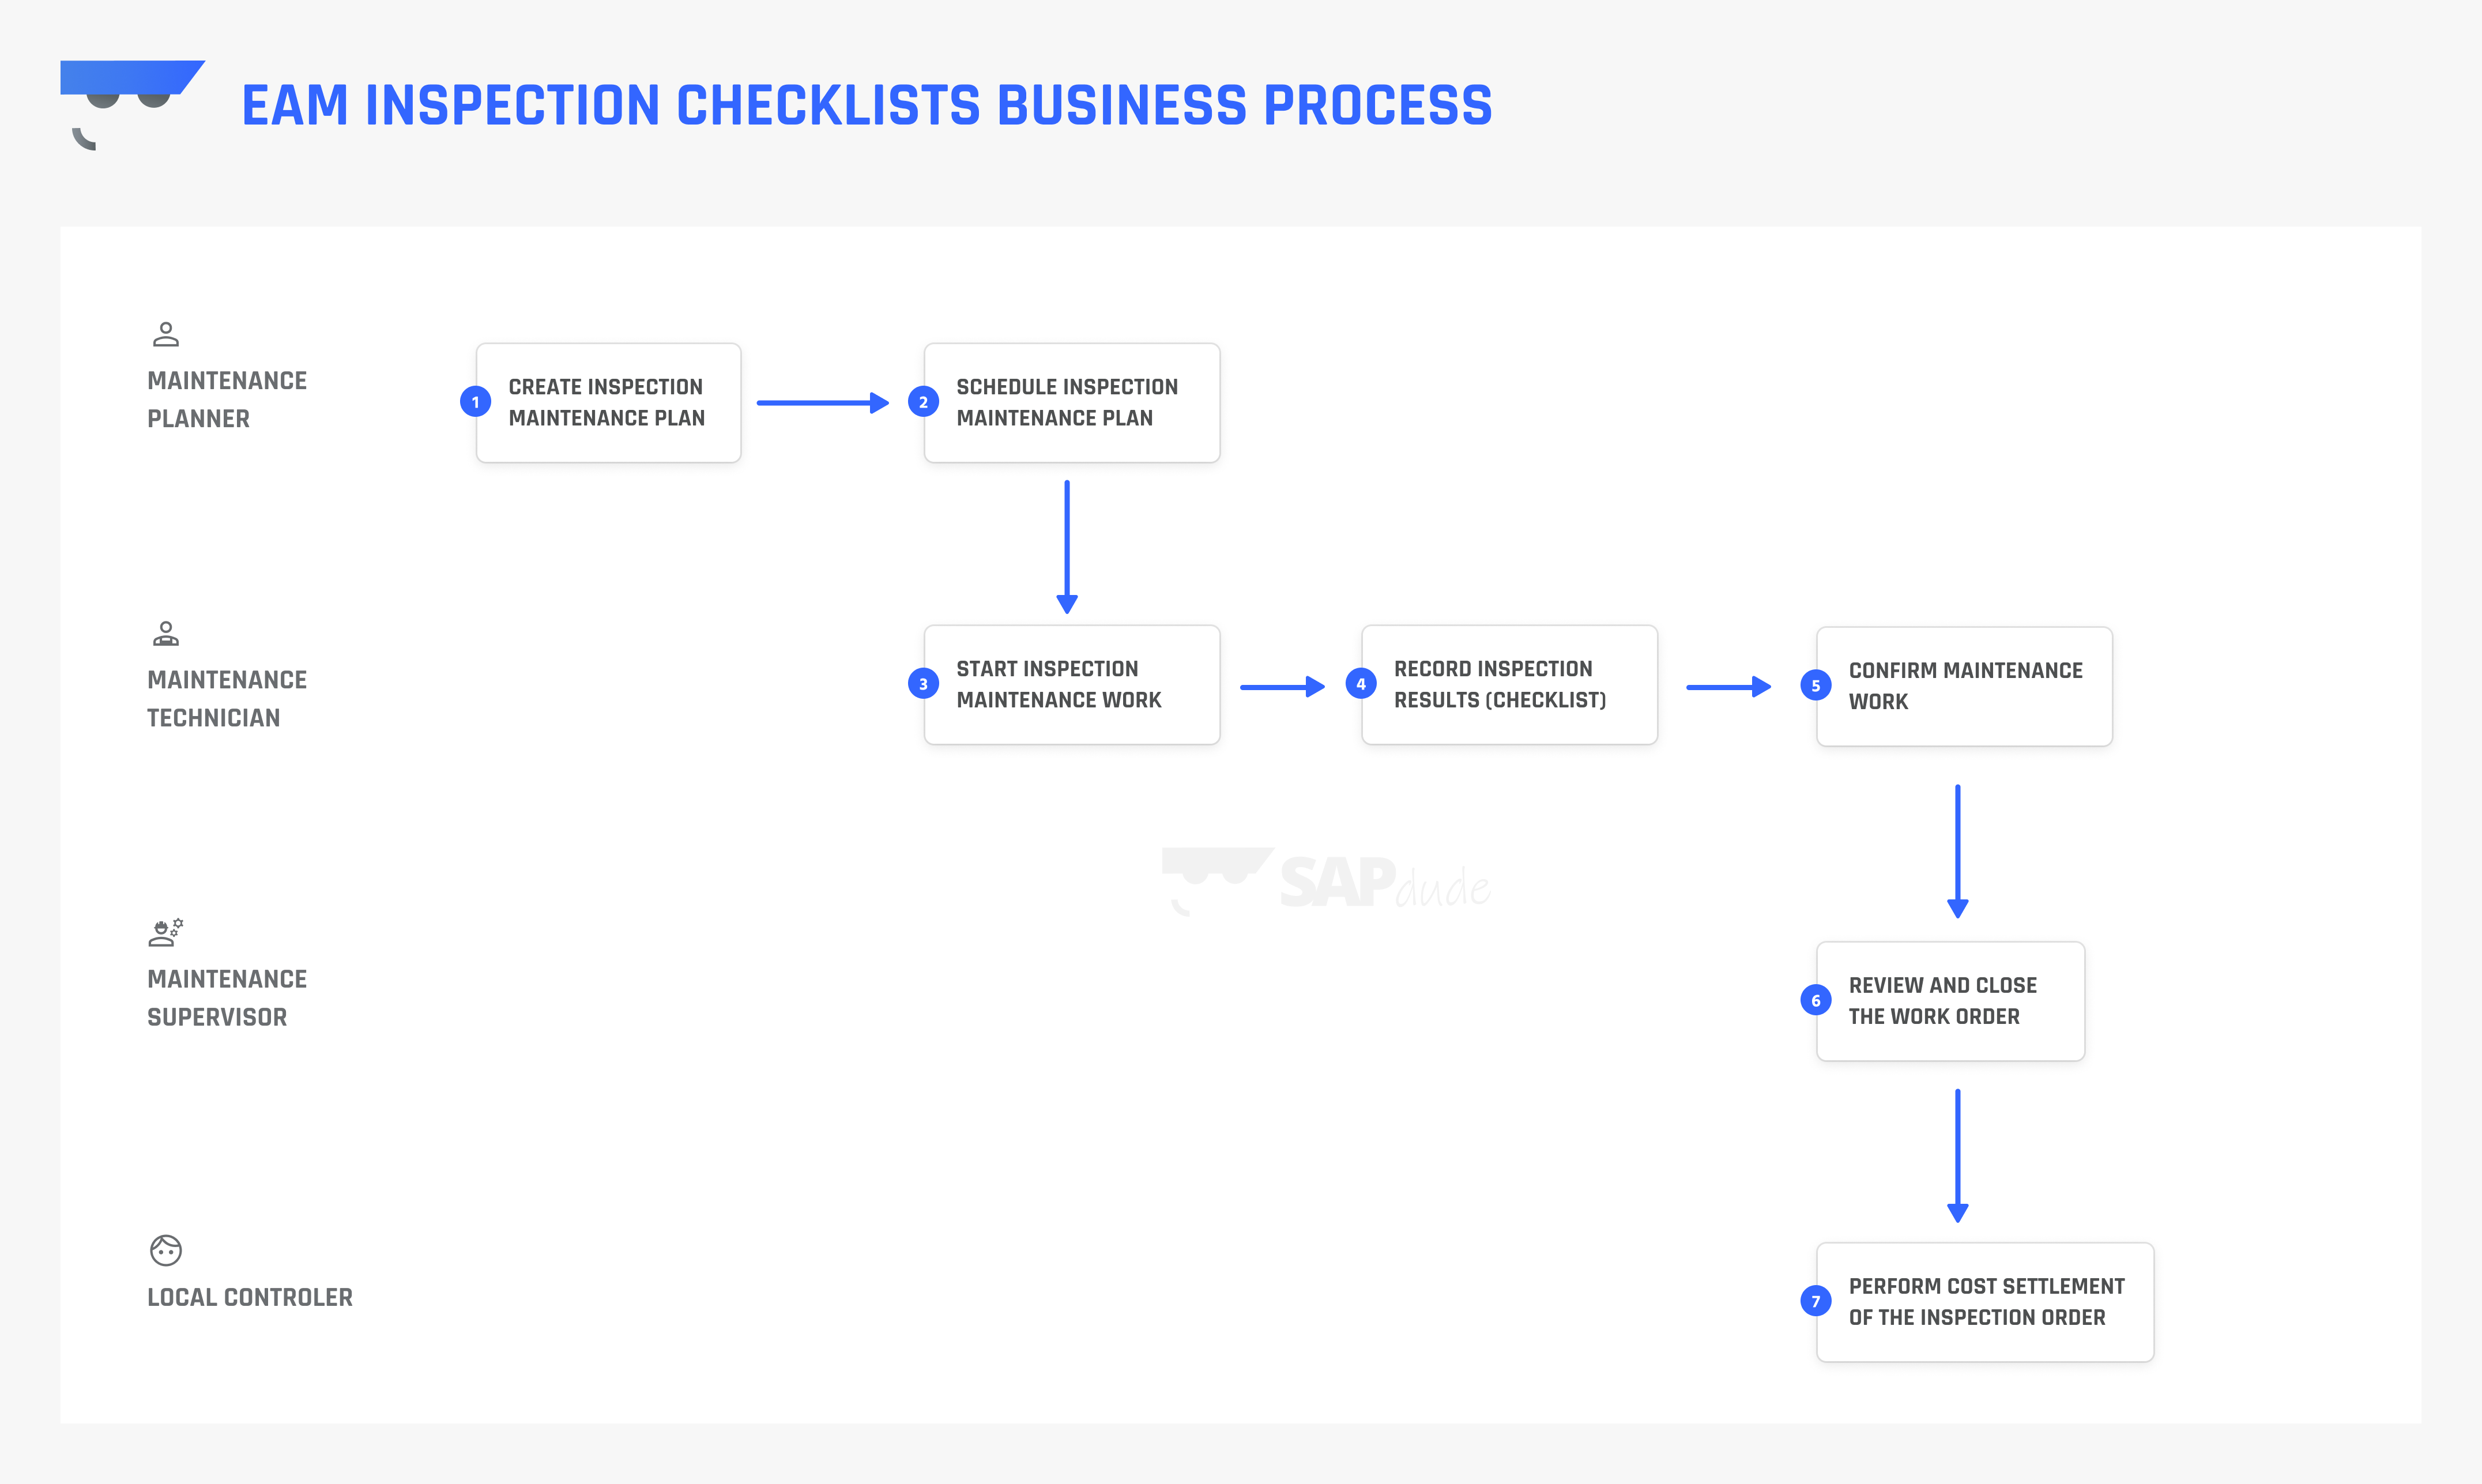 SAP EAM Inspection Checklist Configuration Steps and Business Process